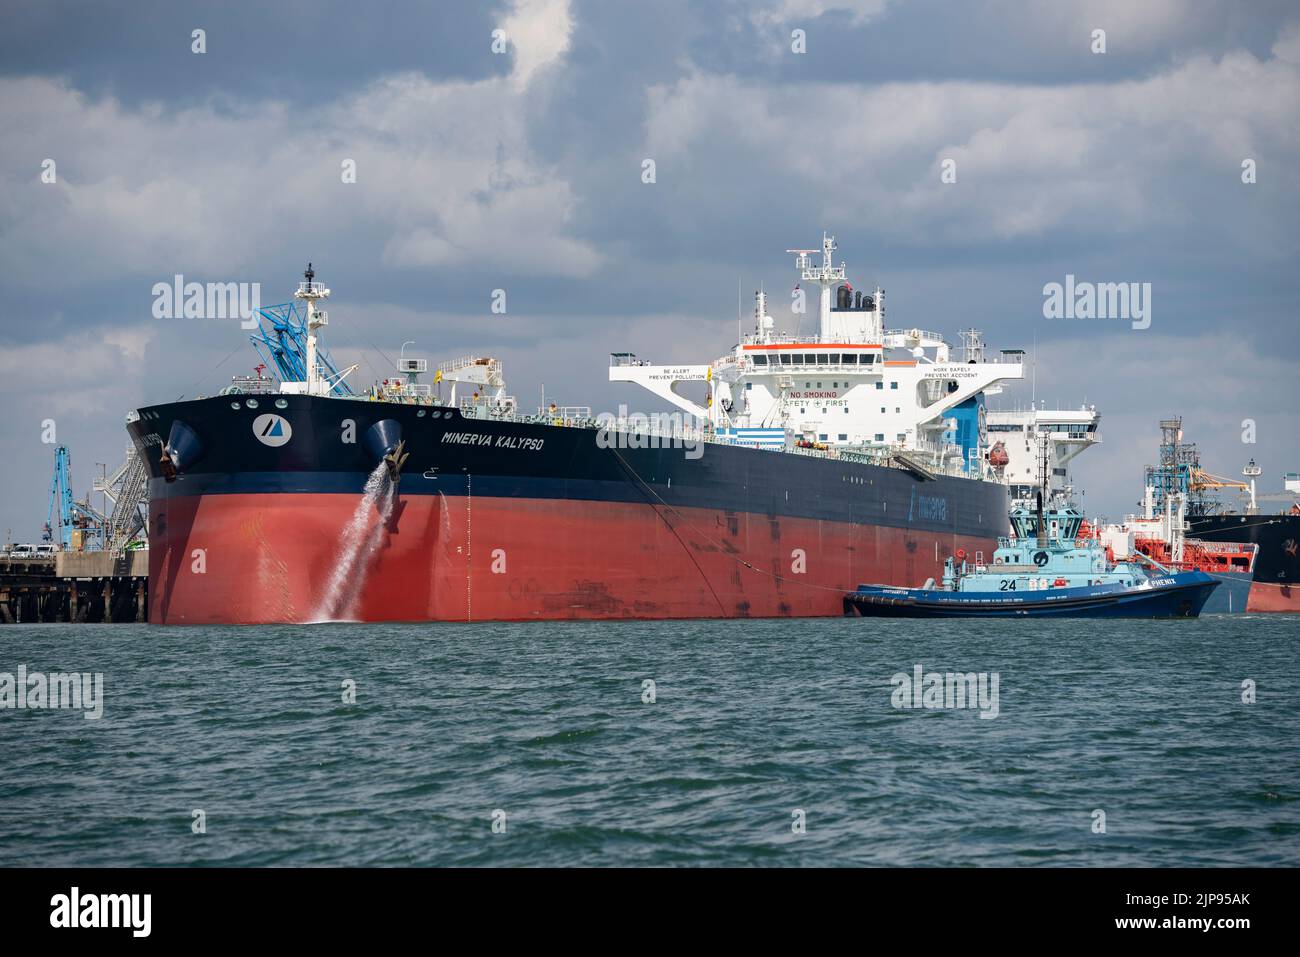 Crude Oil Tanker Minerva Kalypso berthed at  the Exxon Mobil Fawley Oil Refinery in Southampton Water on the South coast of England Stock Photo